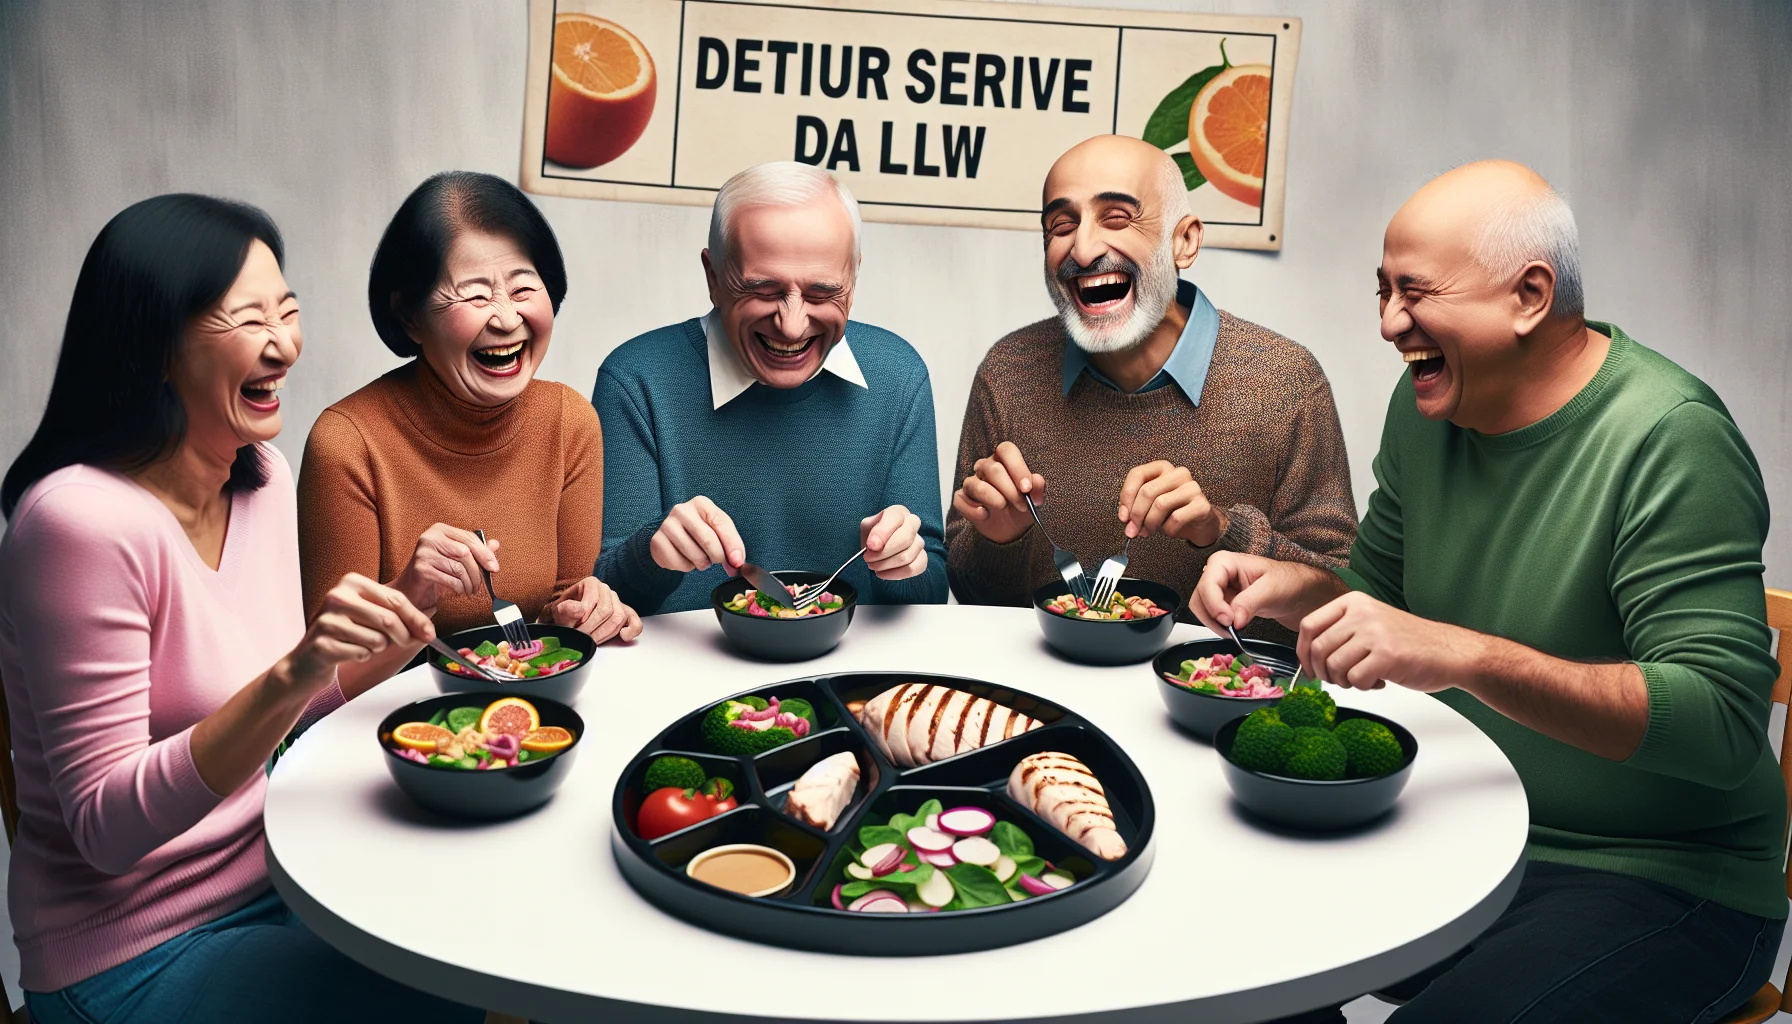 Create a humorous, realistic scenario featuring several older individuals of different descents - a South Asian woman, a White man, and a Middle-Eastern man all seated around a circular table. They are laughing heartily as they navigate various single-serve meals designed for a diet plan. The food items consist of remarkably small portions of well-balanced meals like a single boiled broccoli floret, a slice of grilled chicken the size of a credit card, and a vibrant salad that seems to be more composed of the bowl than the actual greens. Convey a light-hearted atmosphere with a touch of mockery towards extreme dieting.